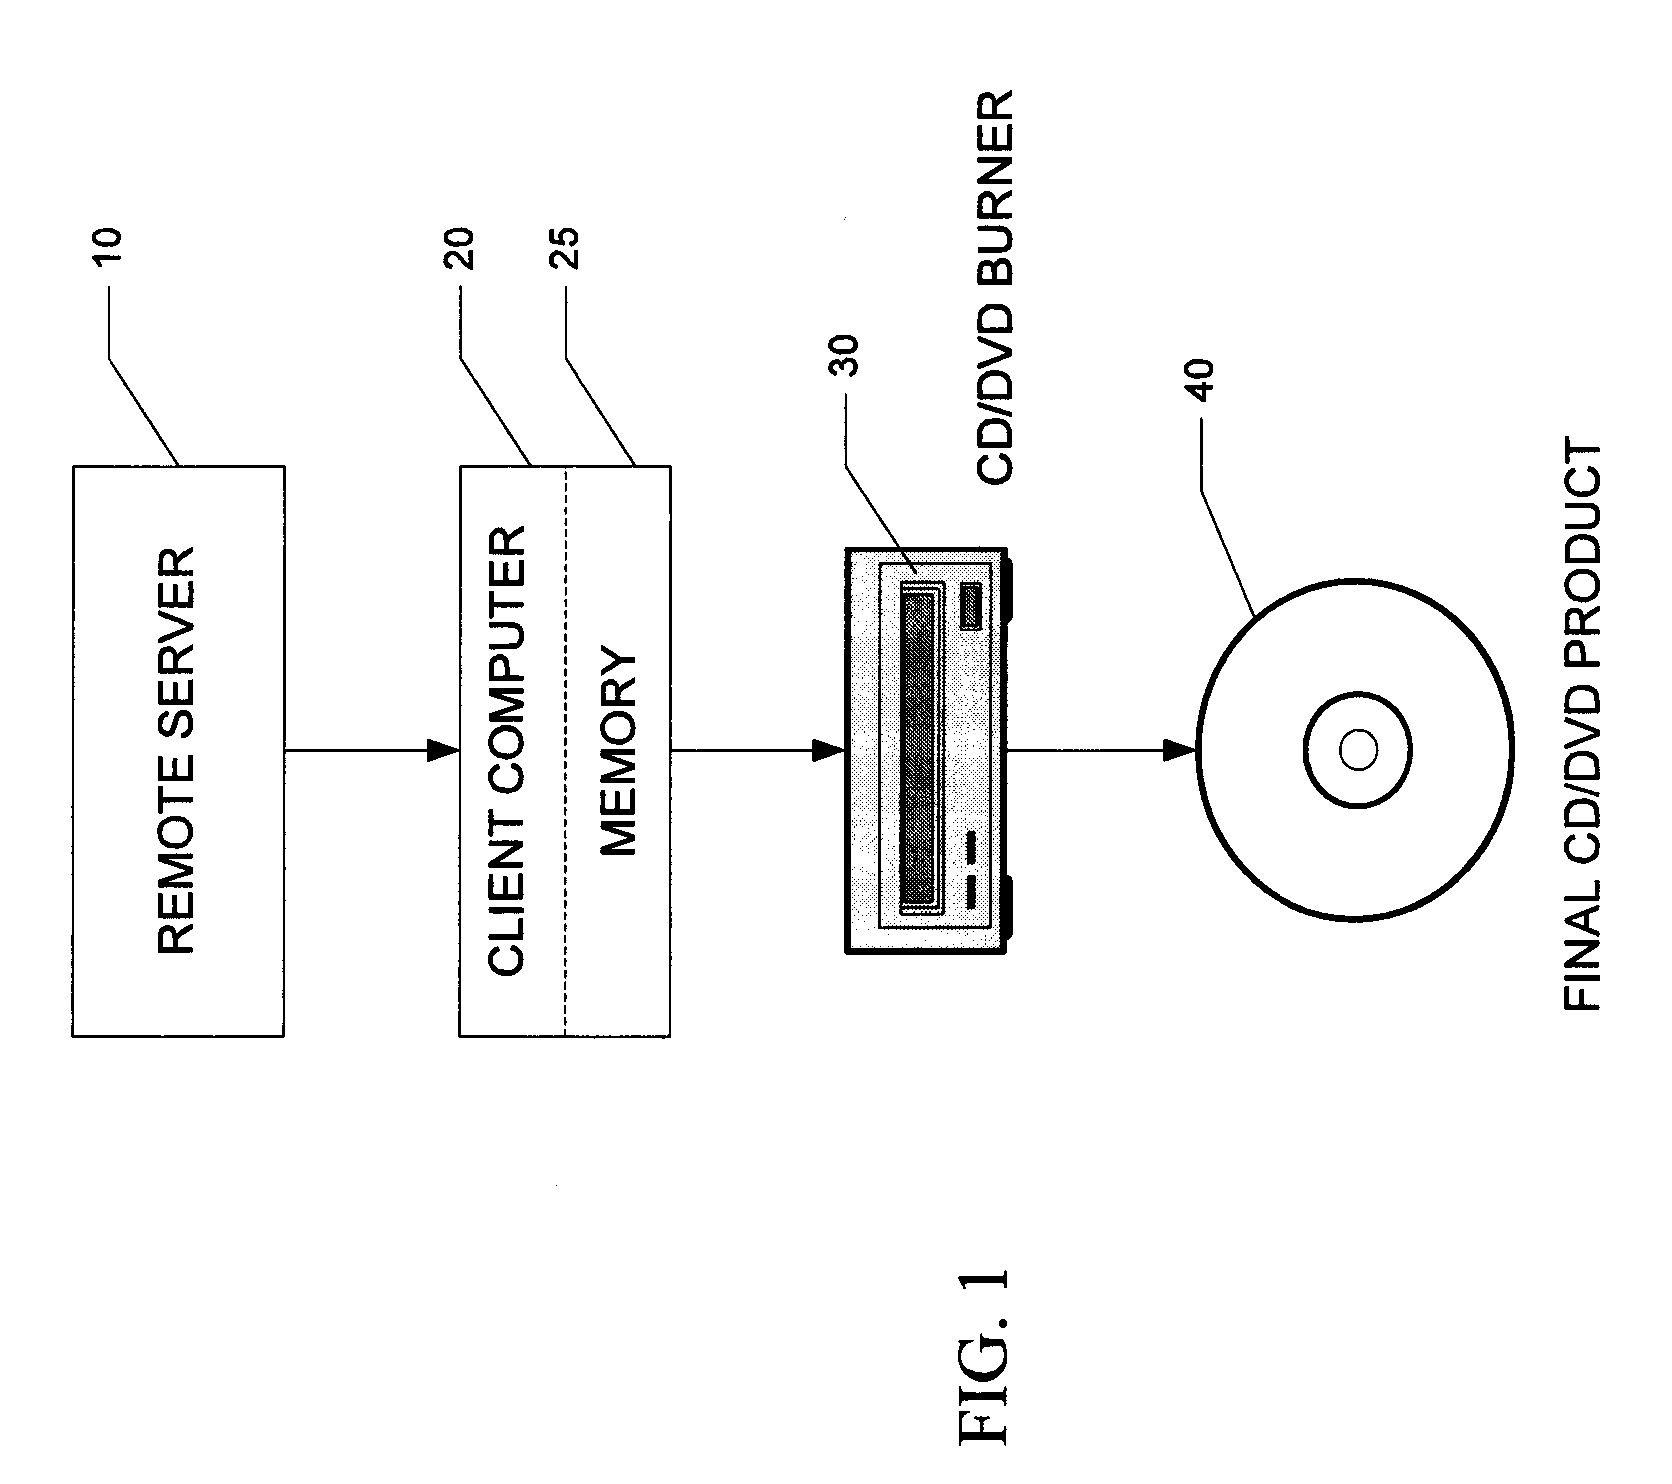 System And Method For Concurrently Downloading Digital Content And Recording To Removable Media